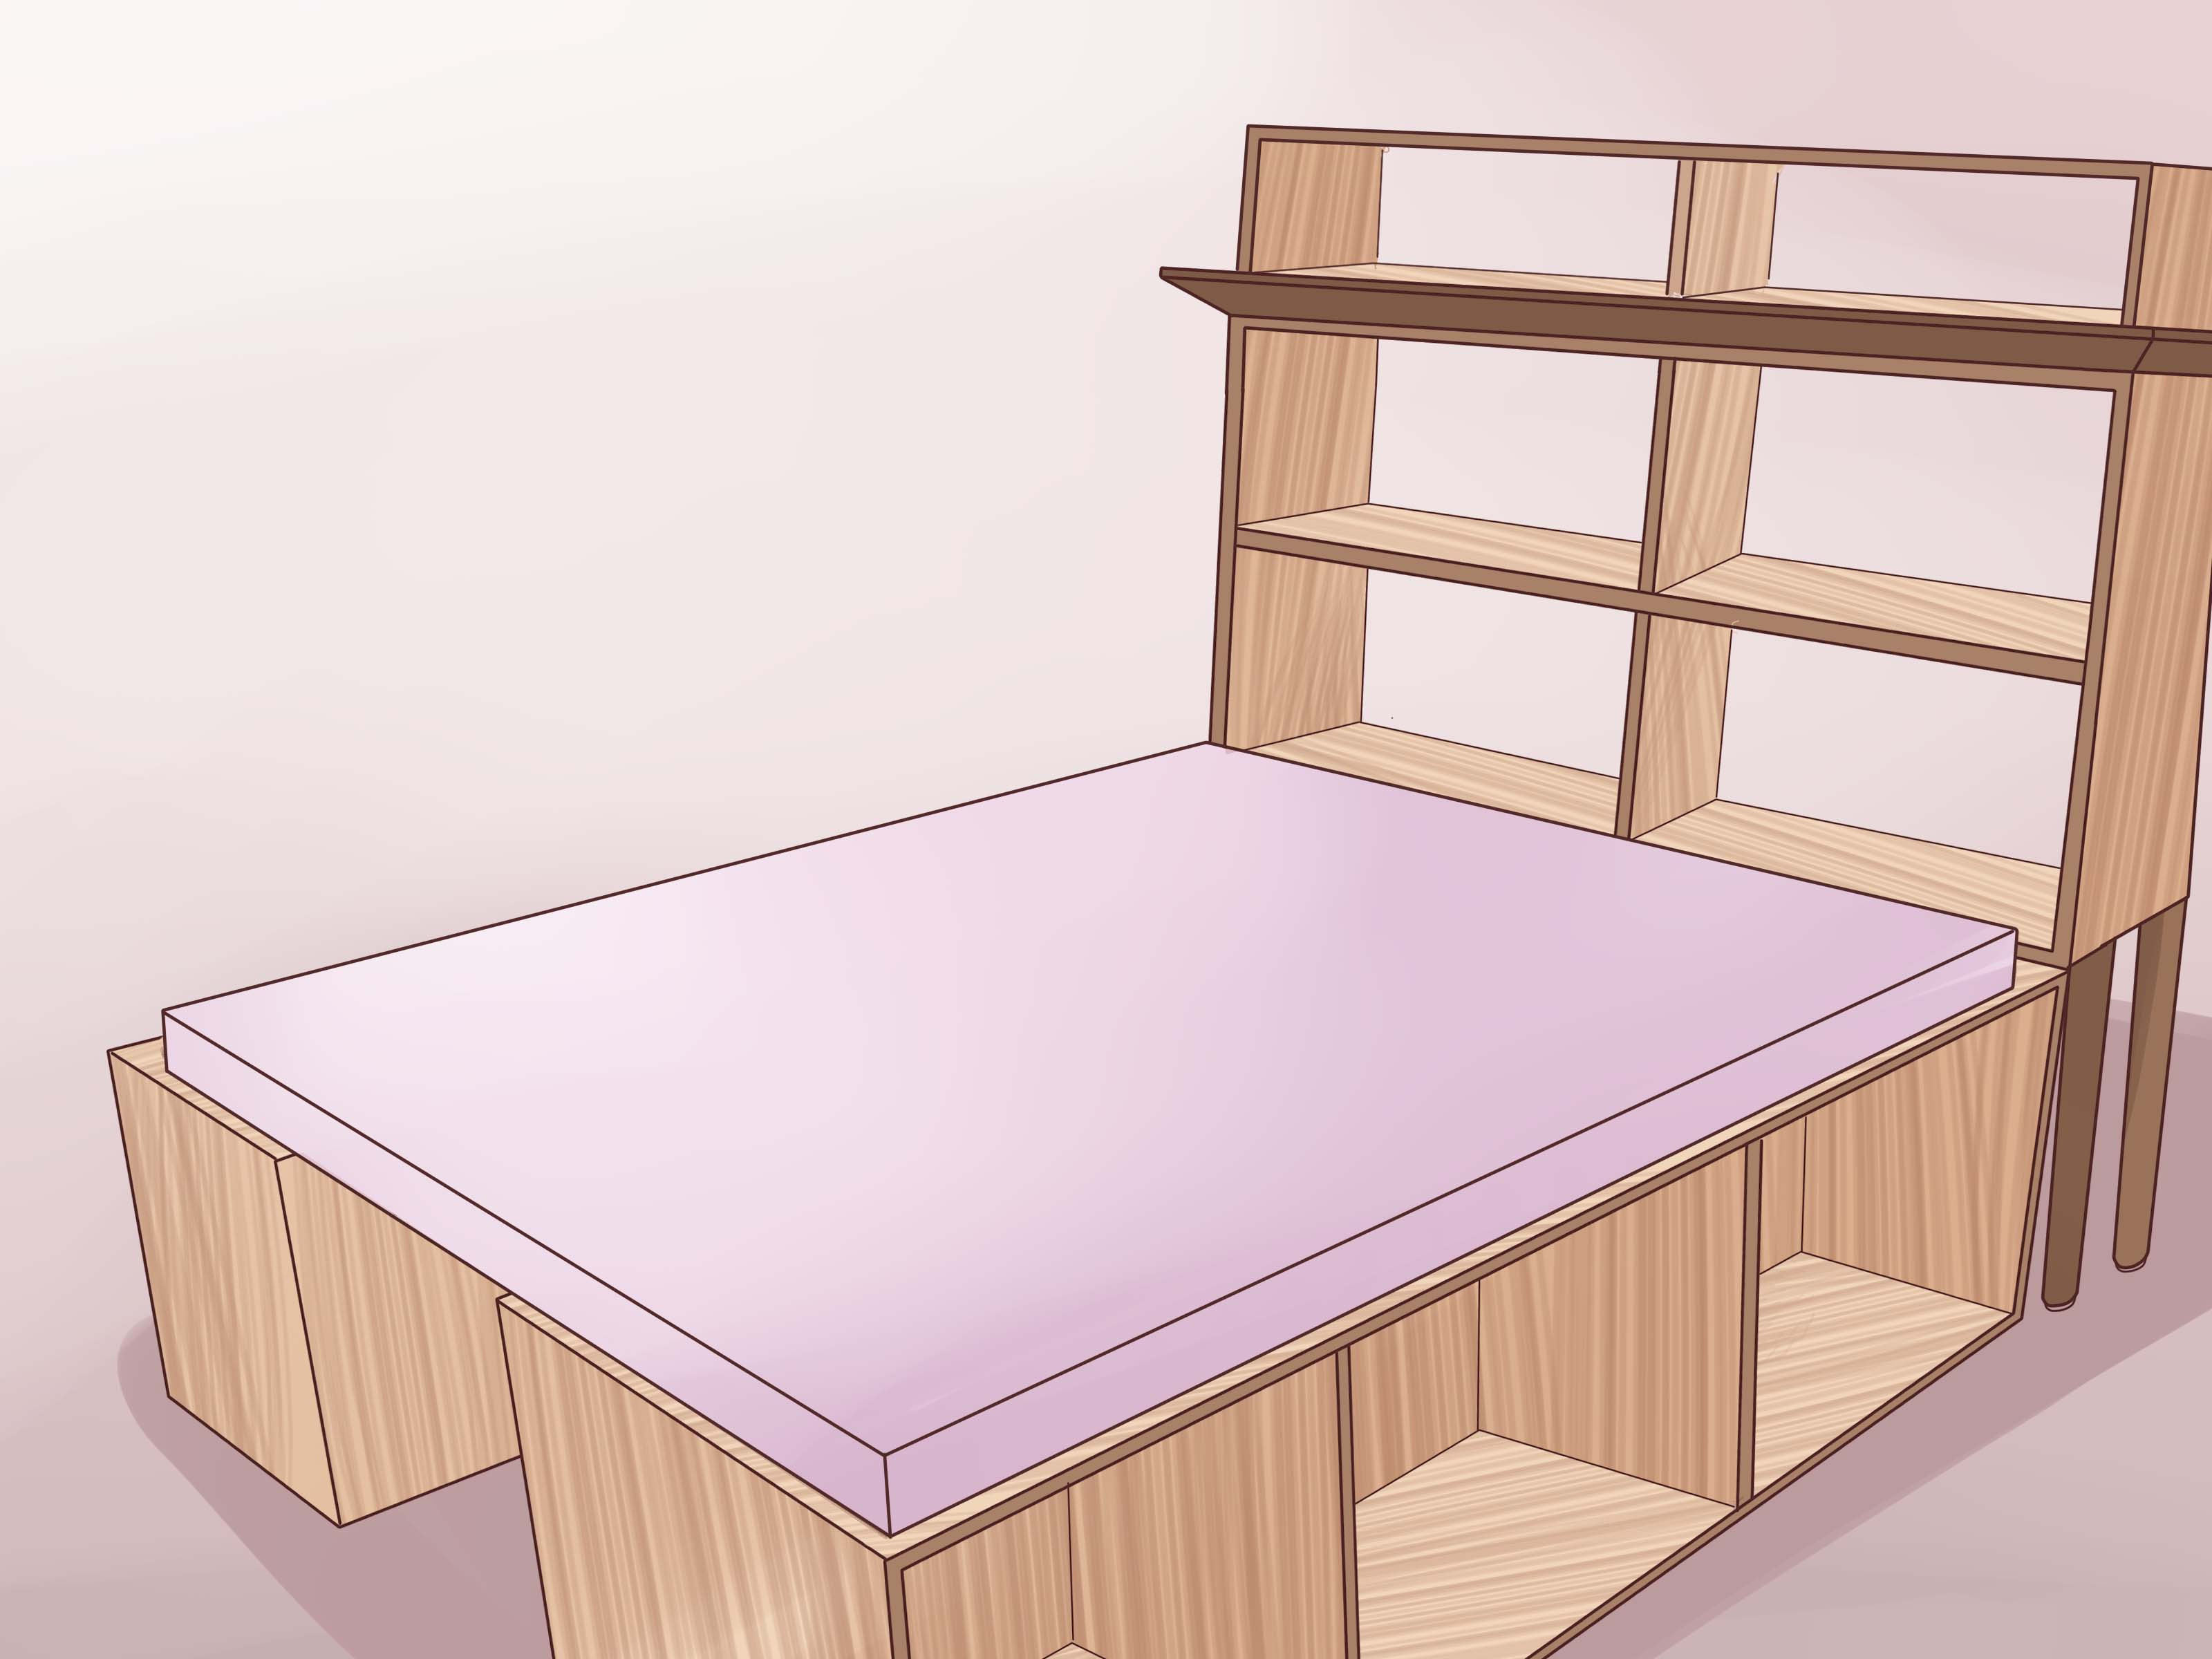 hardwood flooring box size of 3 ways to build a wooden bed frame wikihow pertaining to build a wooden bed frame step 29